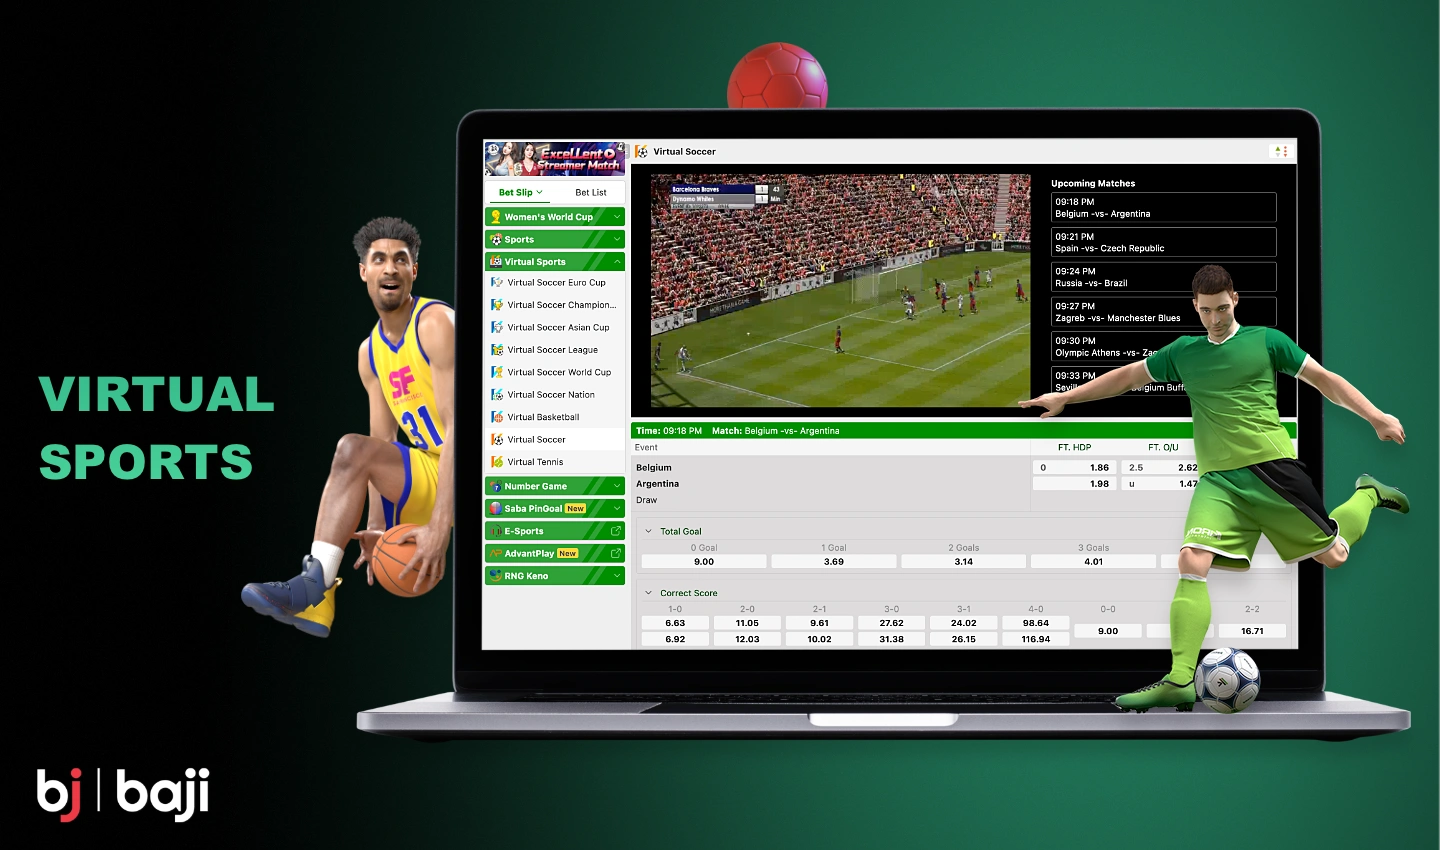 Virtual sports betting at Baji is available to all registered users